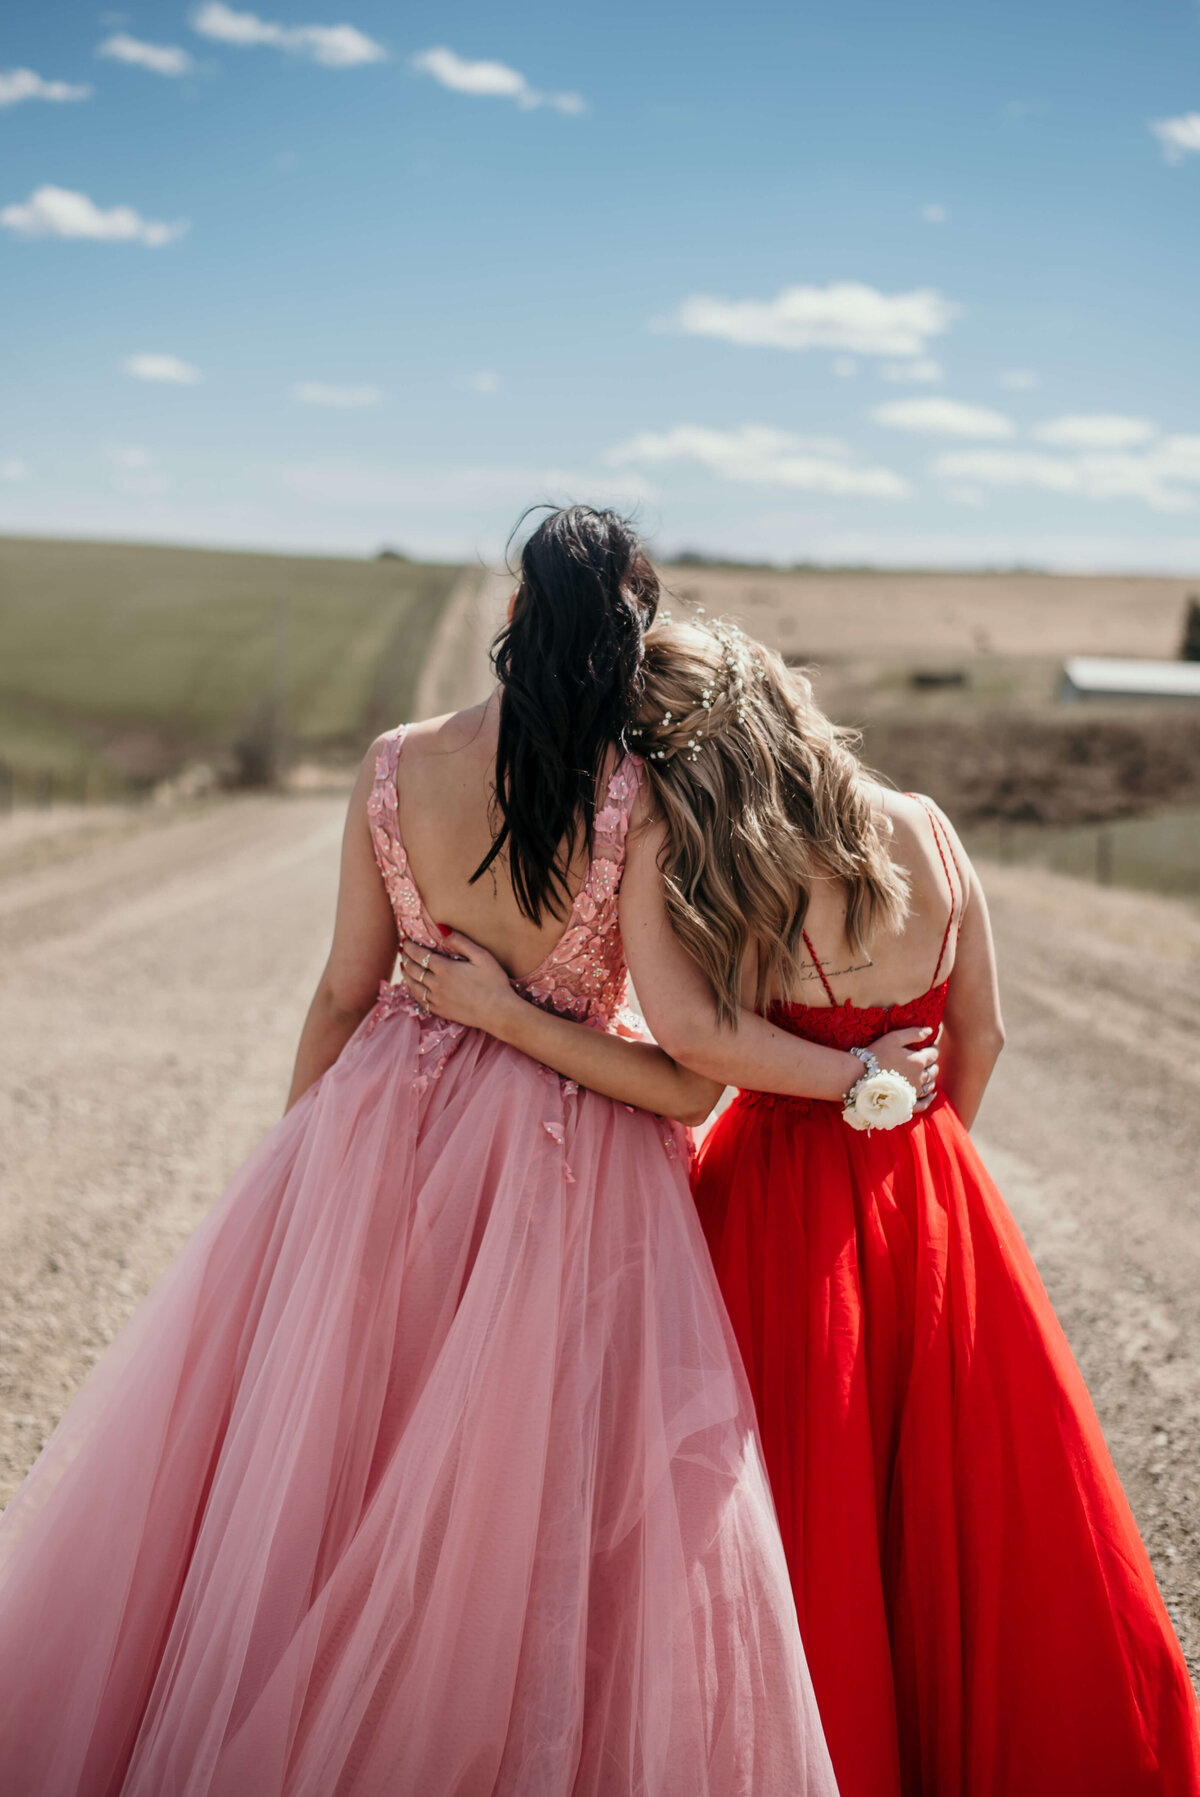 backs of two teenagers on their graduation day in dresses